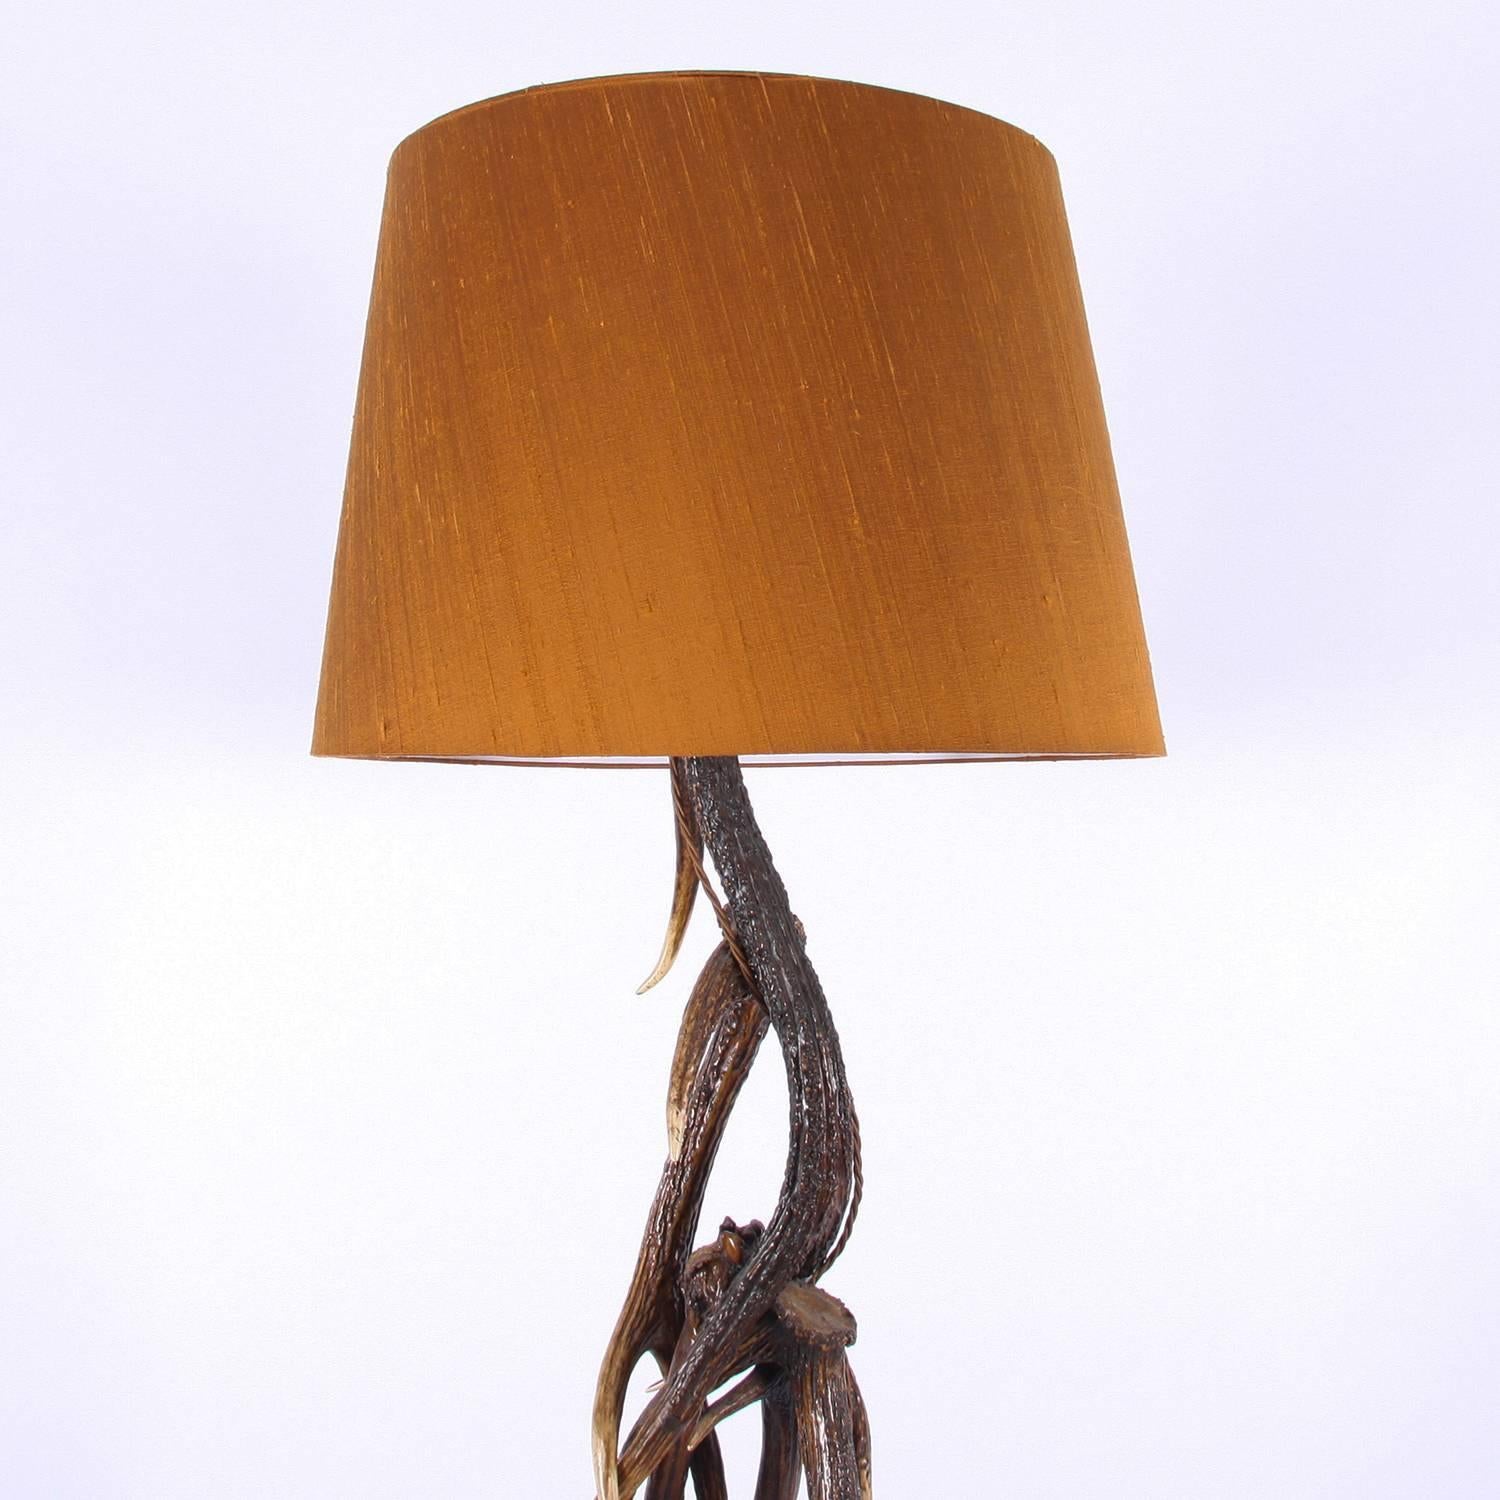 A stylish antler floor lamp, made from several intertwined antlers.

Pictured with a handmade, bespoke, silk lampshade in burnt orange. Rewired and PAT tested.